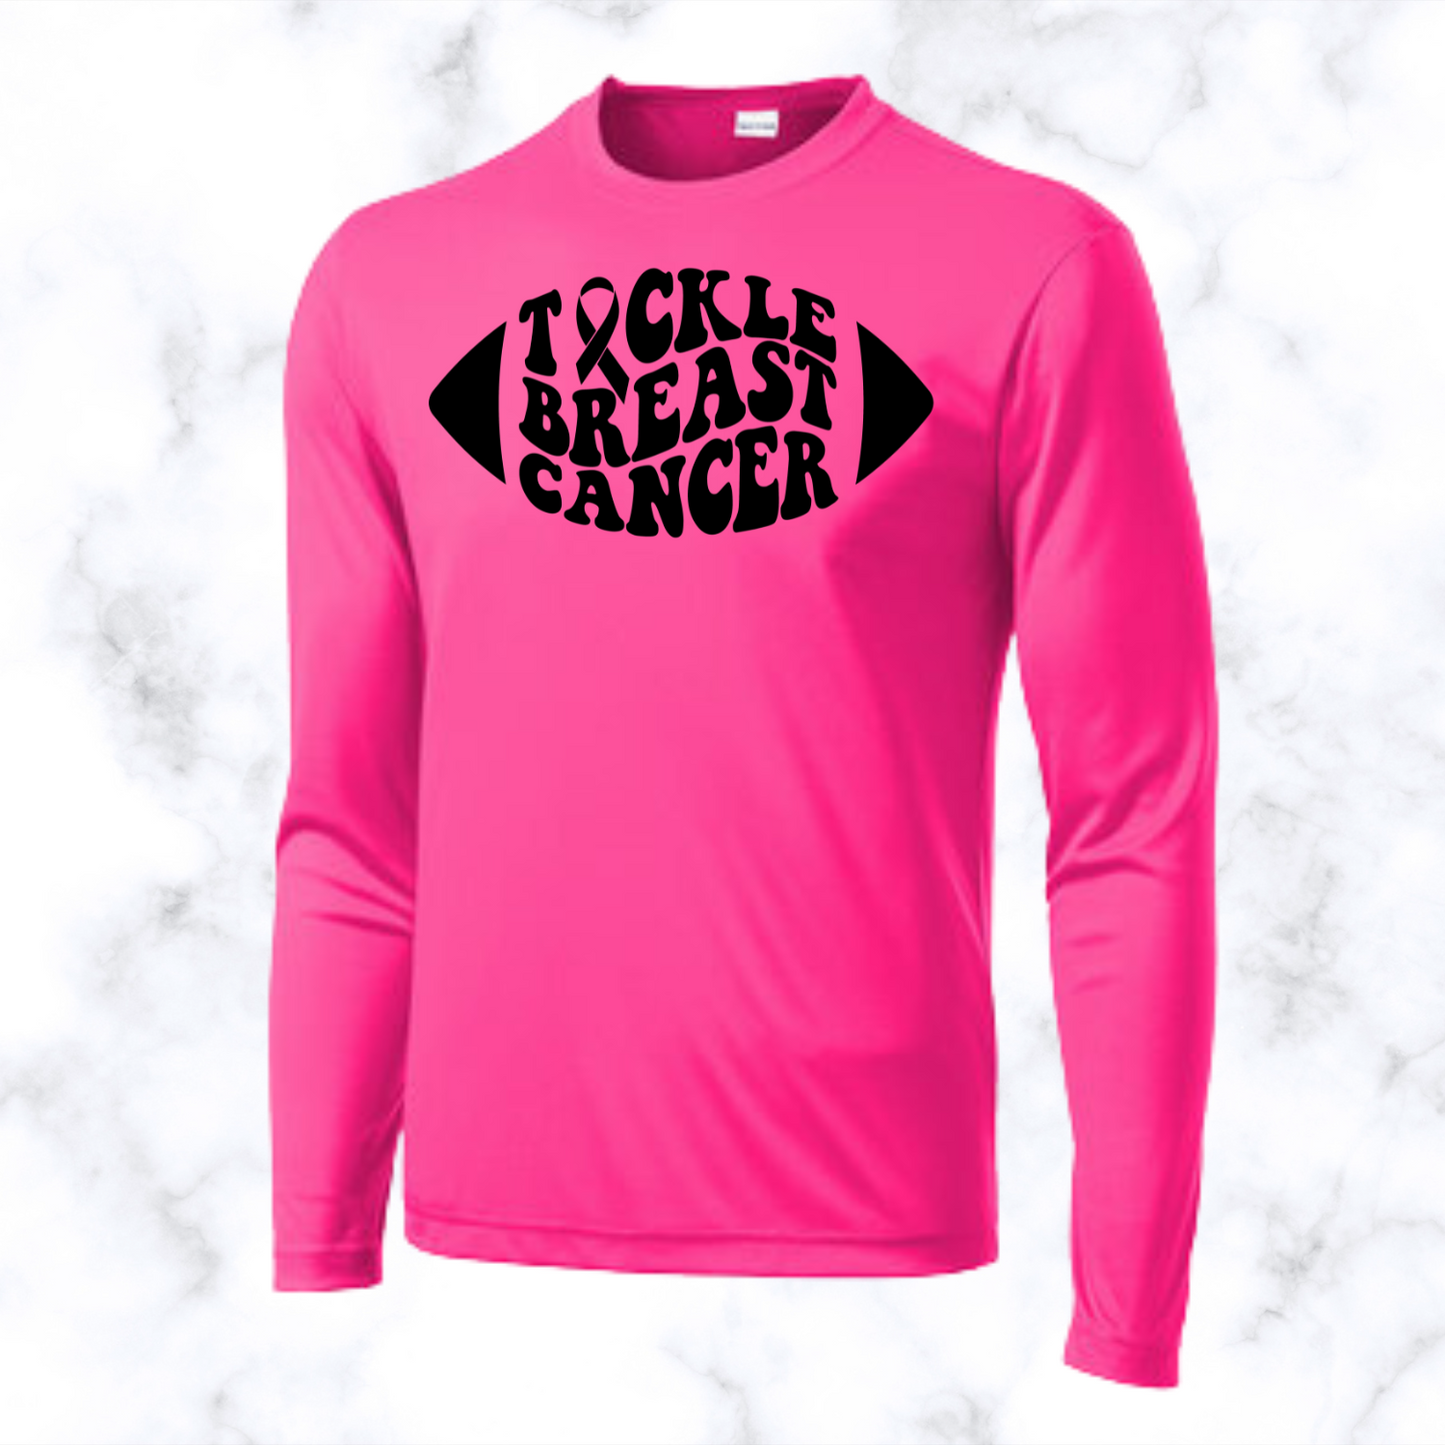 Tackle Breast Cancer Dri-Wick Tee Youth